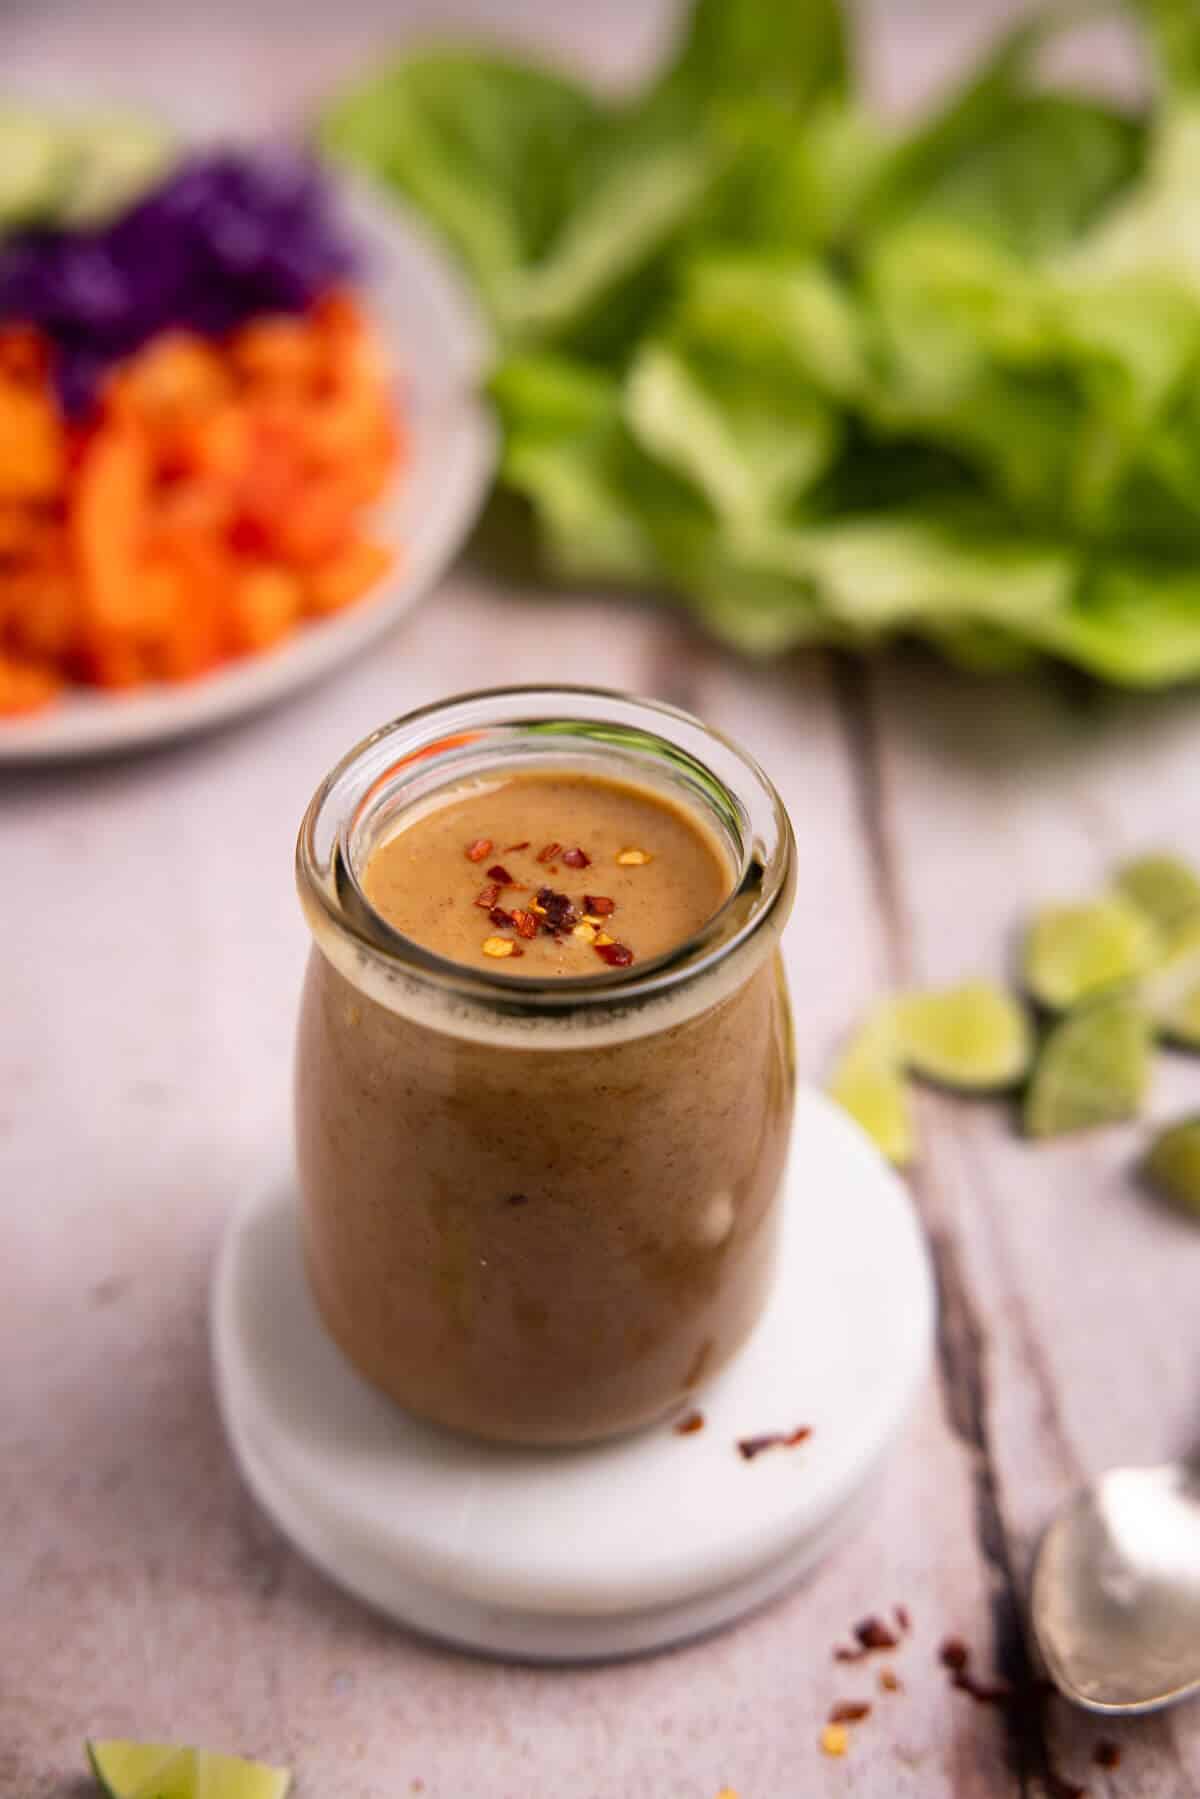 Jar of peanut sauce with vegetables in background.